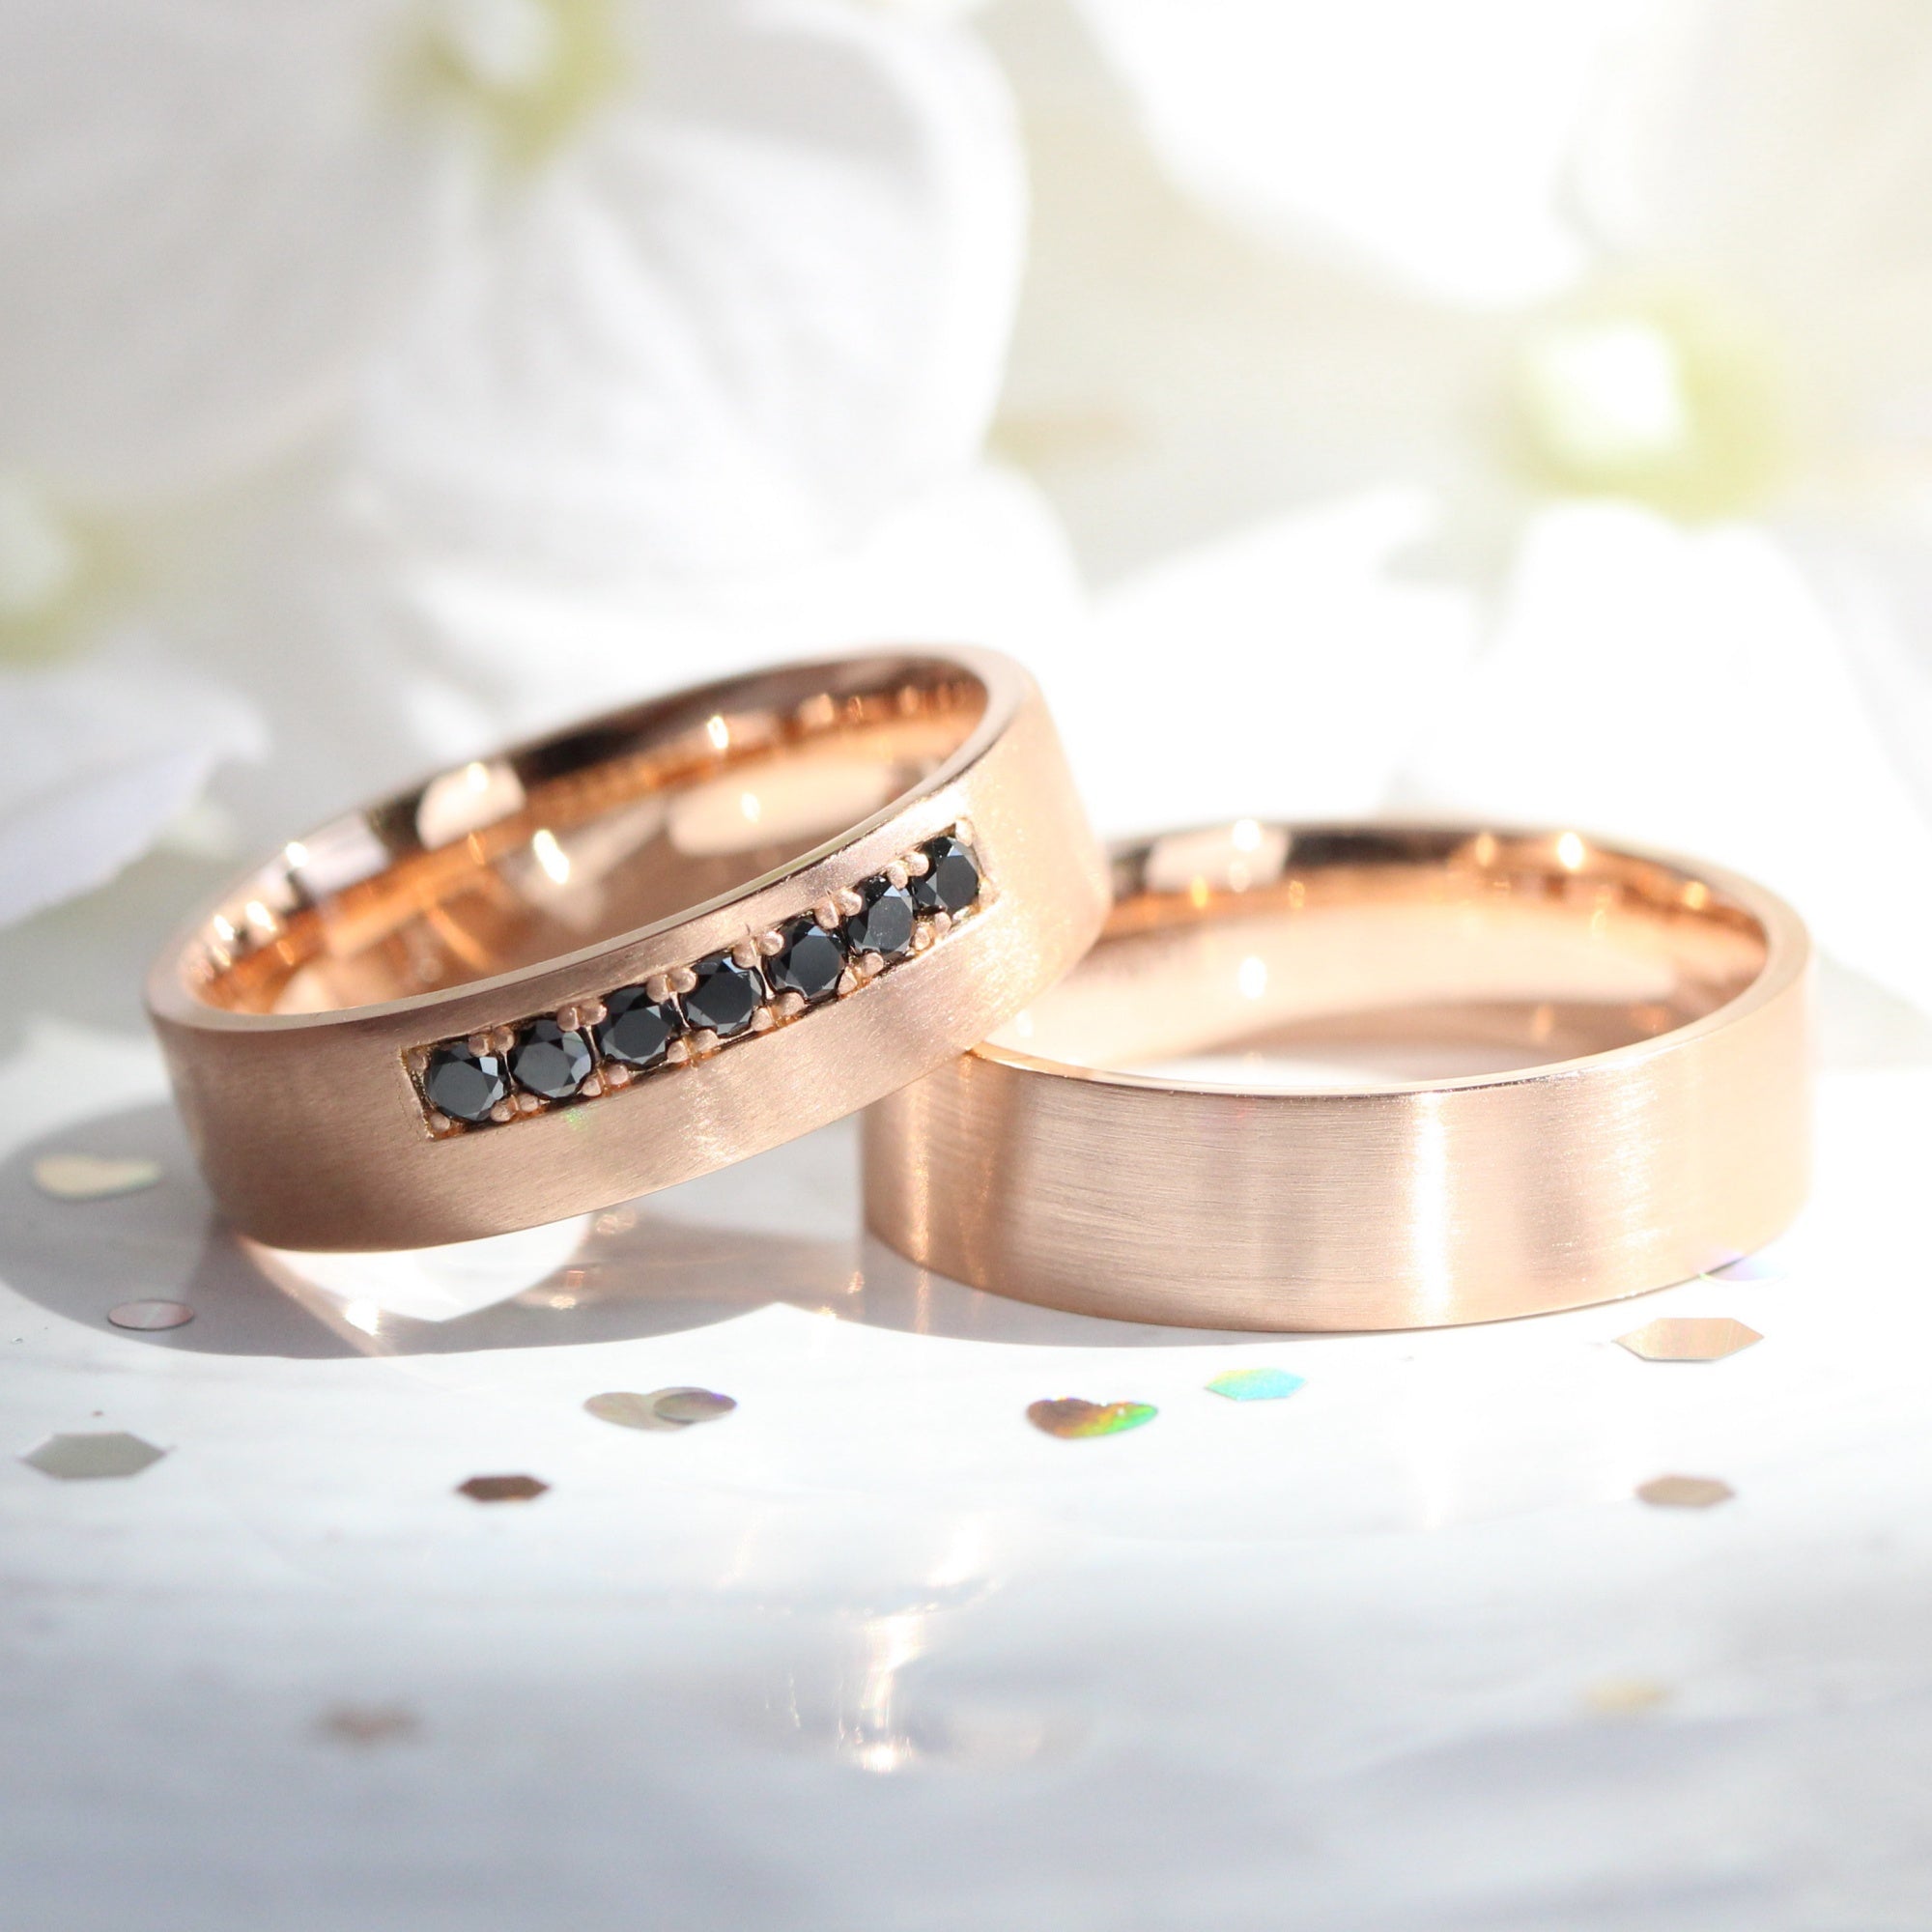 WEDDING / ENGAGEMENT RINGS SET for her & him